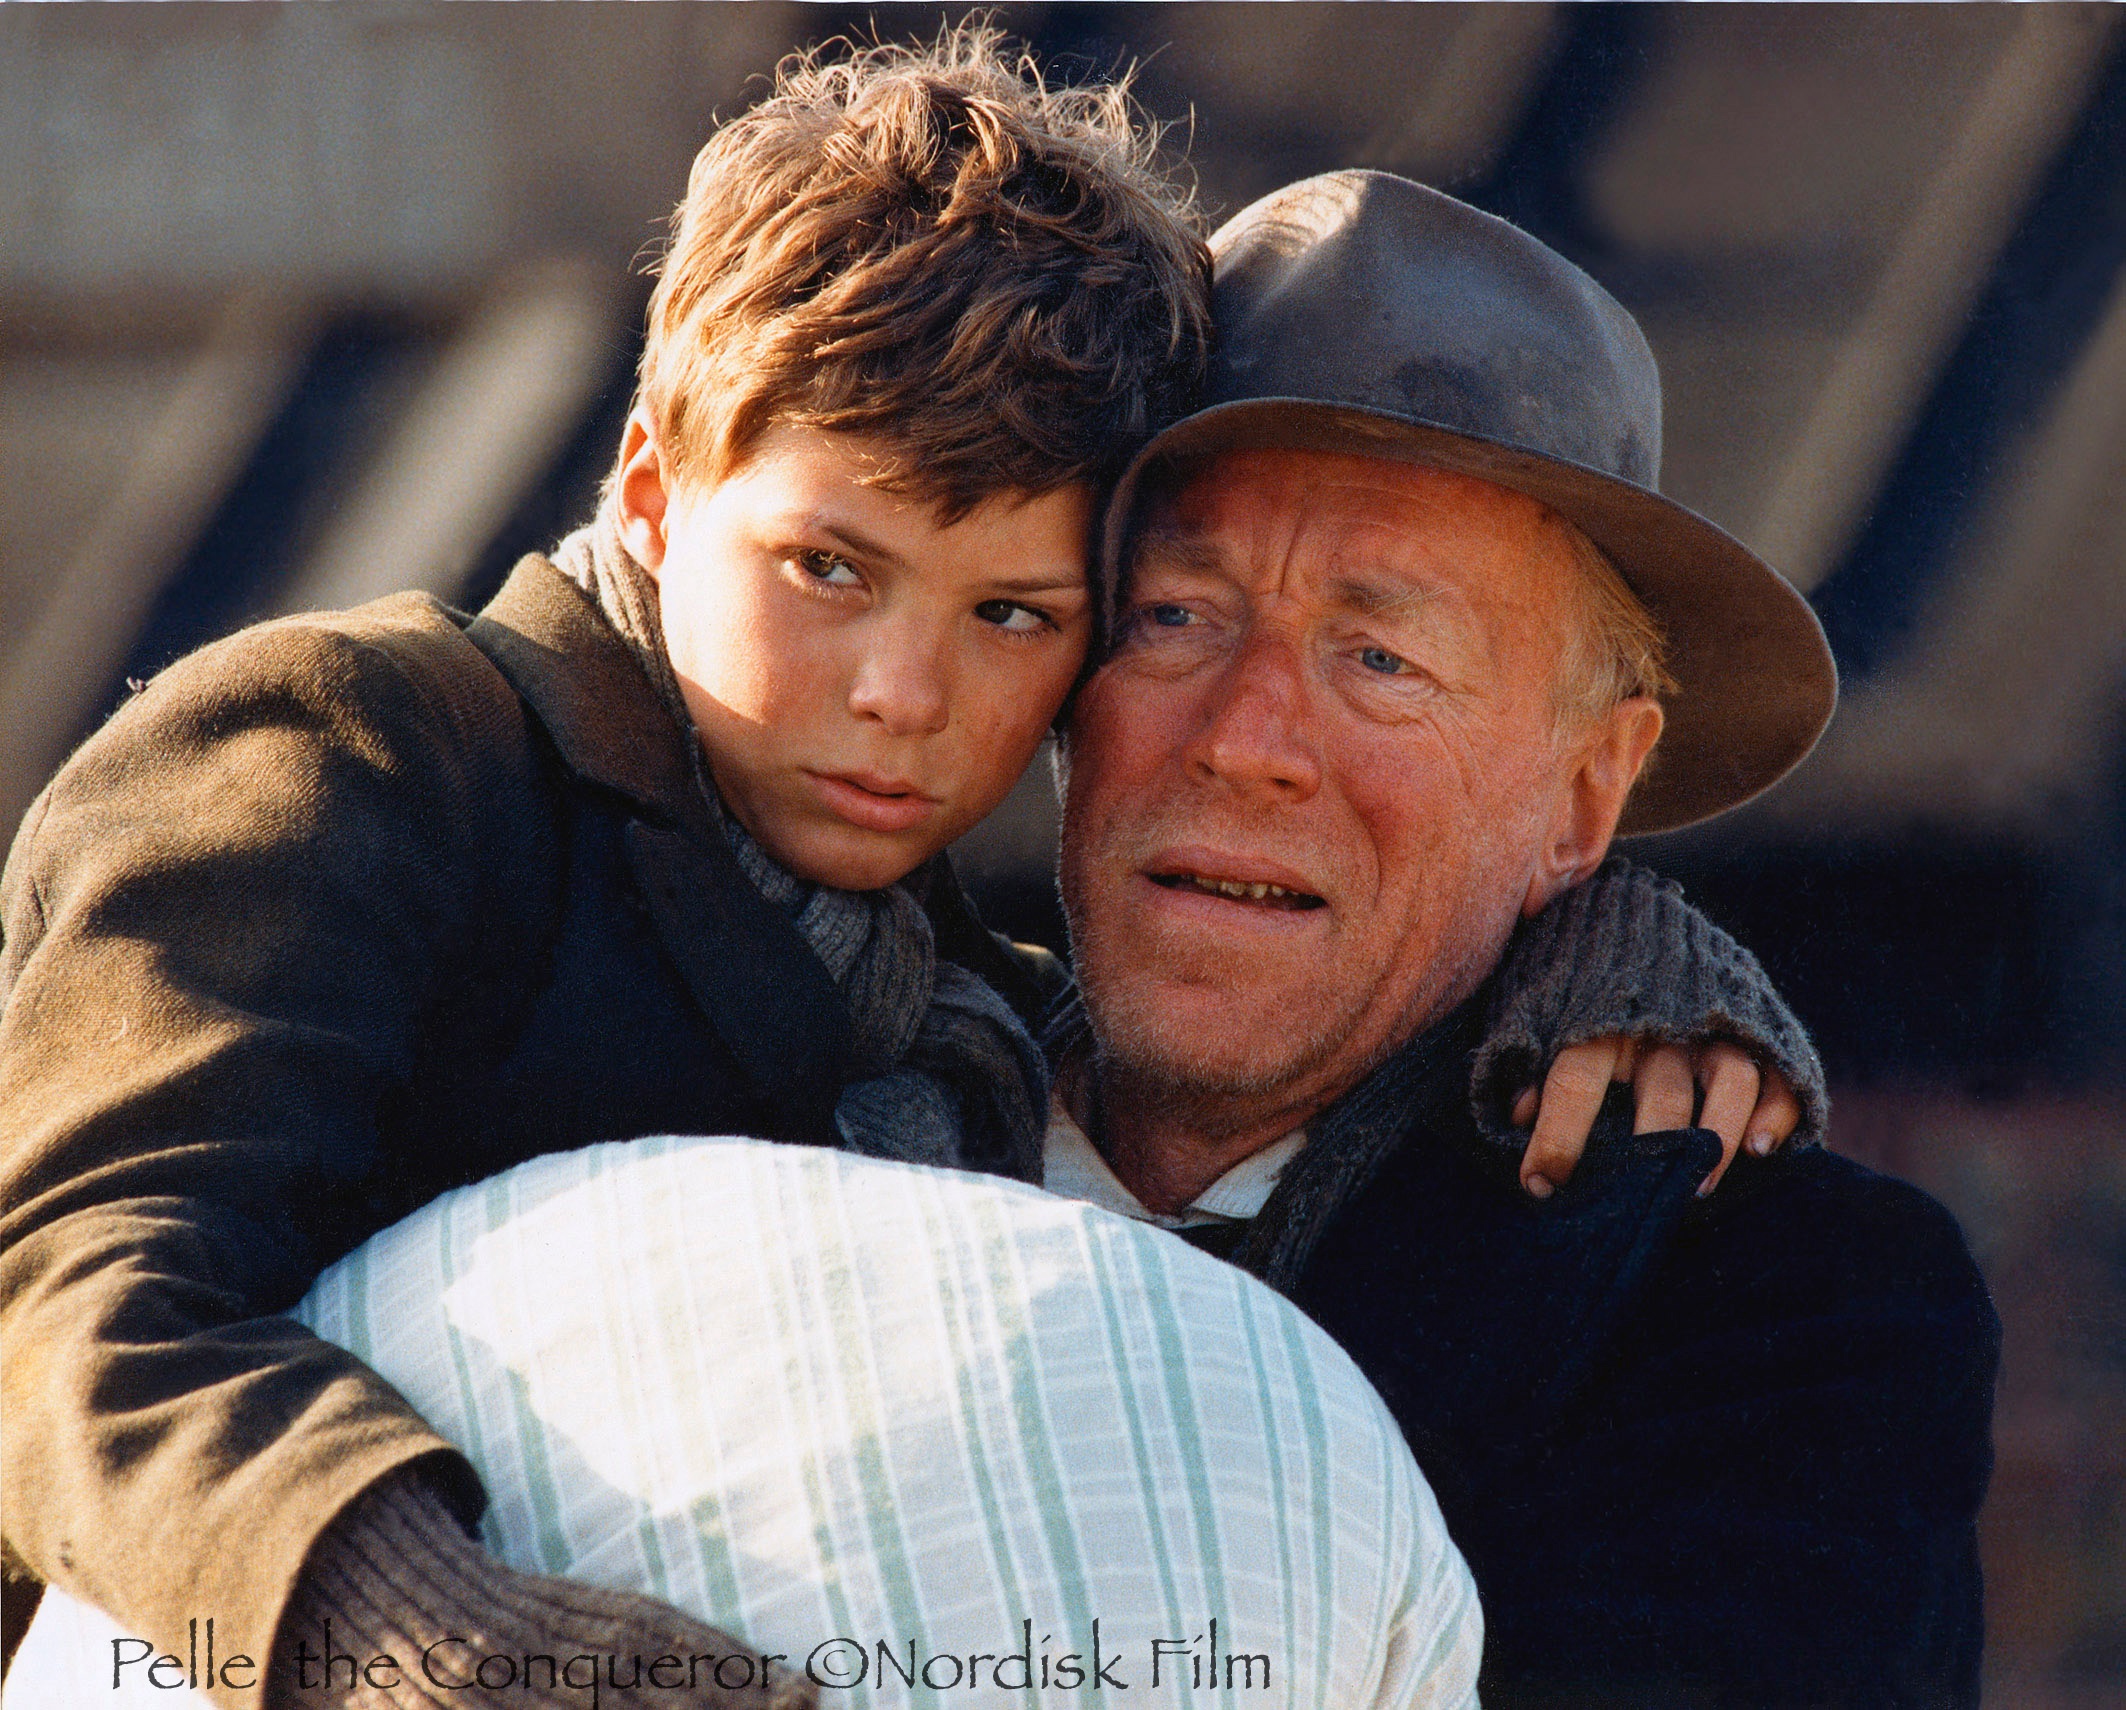 Pelle The Conqueror 1988. Directed by Bille August. Picture use for the poster. Pelle Hvenegard and Max von Sydow